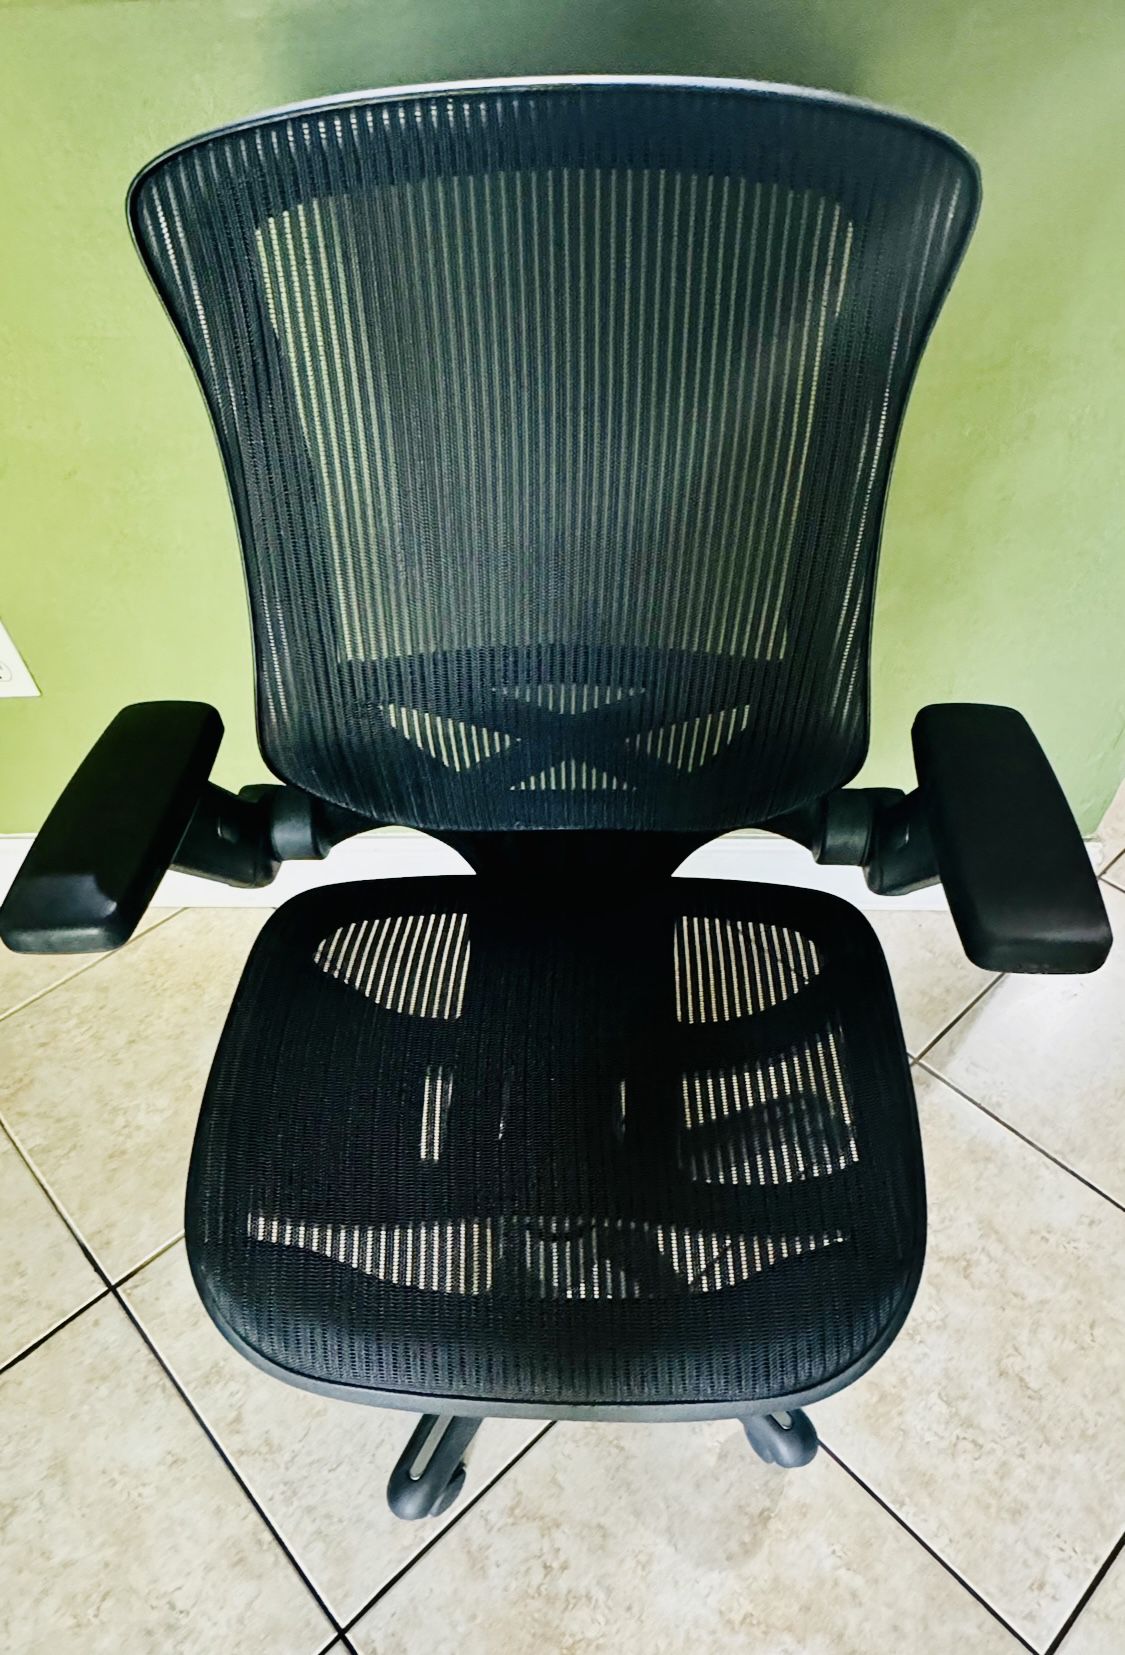 1 Office Star  Ventilated Manager's Office Desk Chair with Breathable Mesh Seat and Back, Black Base. (IN LIKE NEW CONDITIONS) $80 